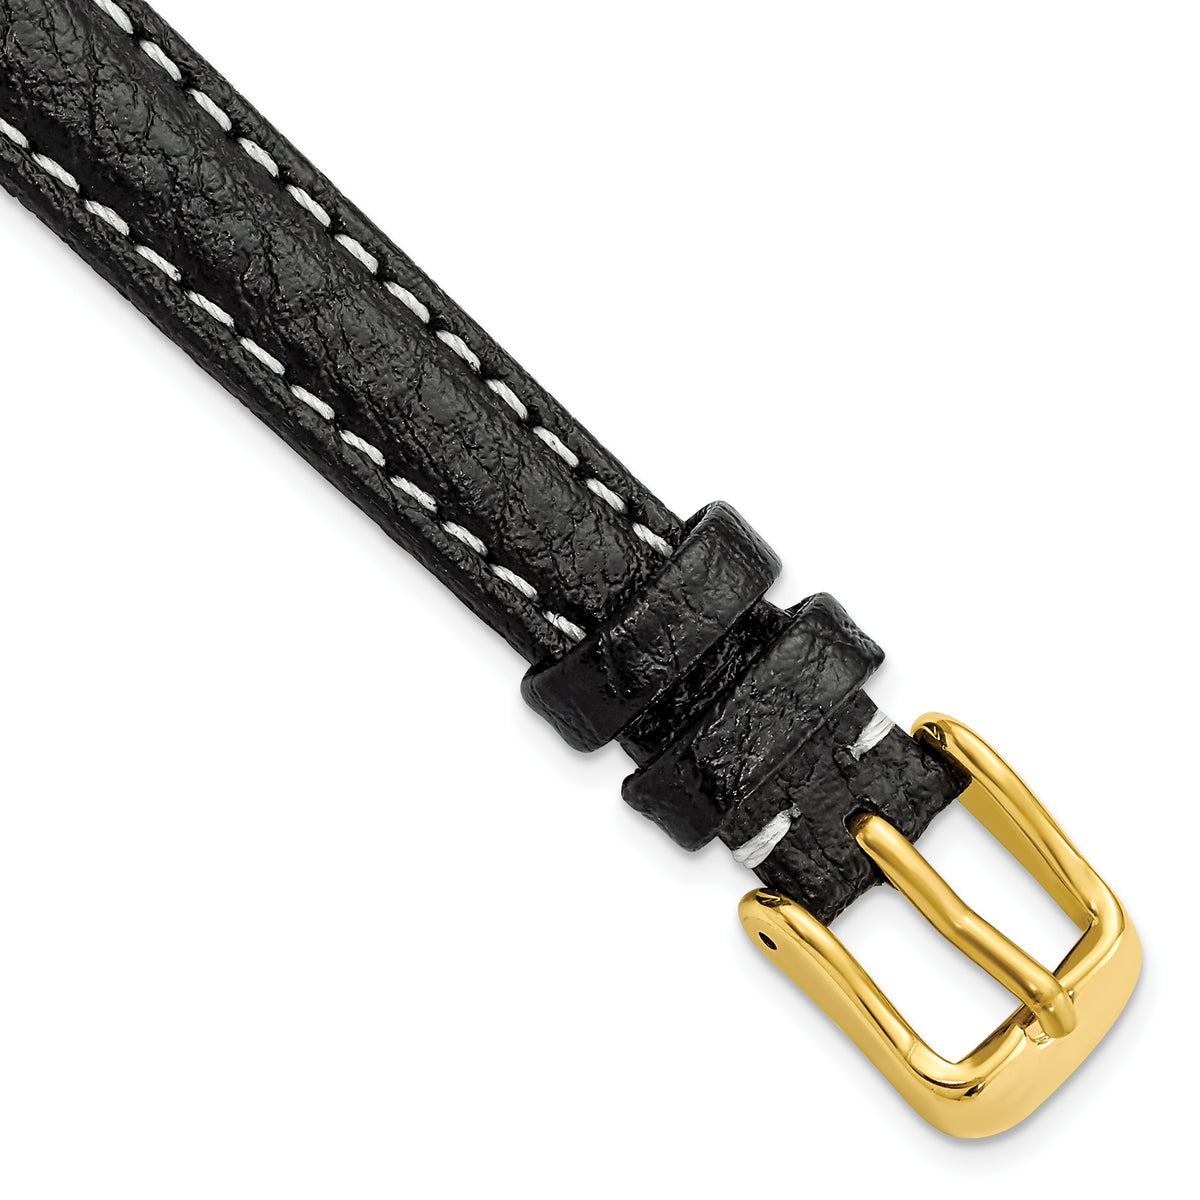 DeBeer 12mm Black Sport Leather with White Stitching and Gold-tone Buckle 6.75 inch Watch Band